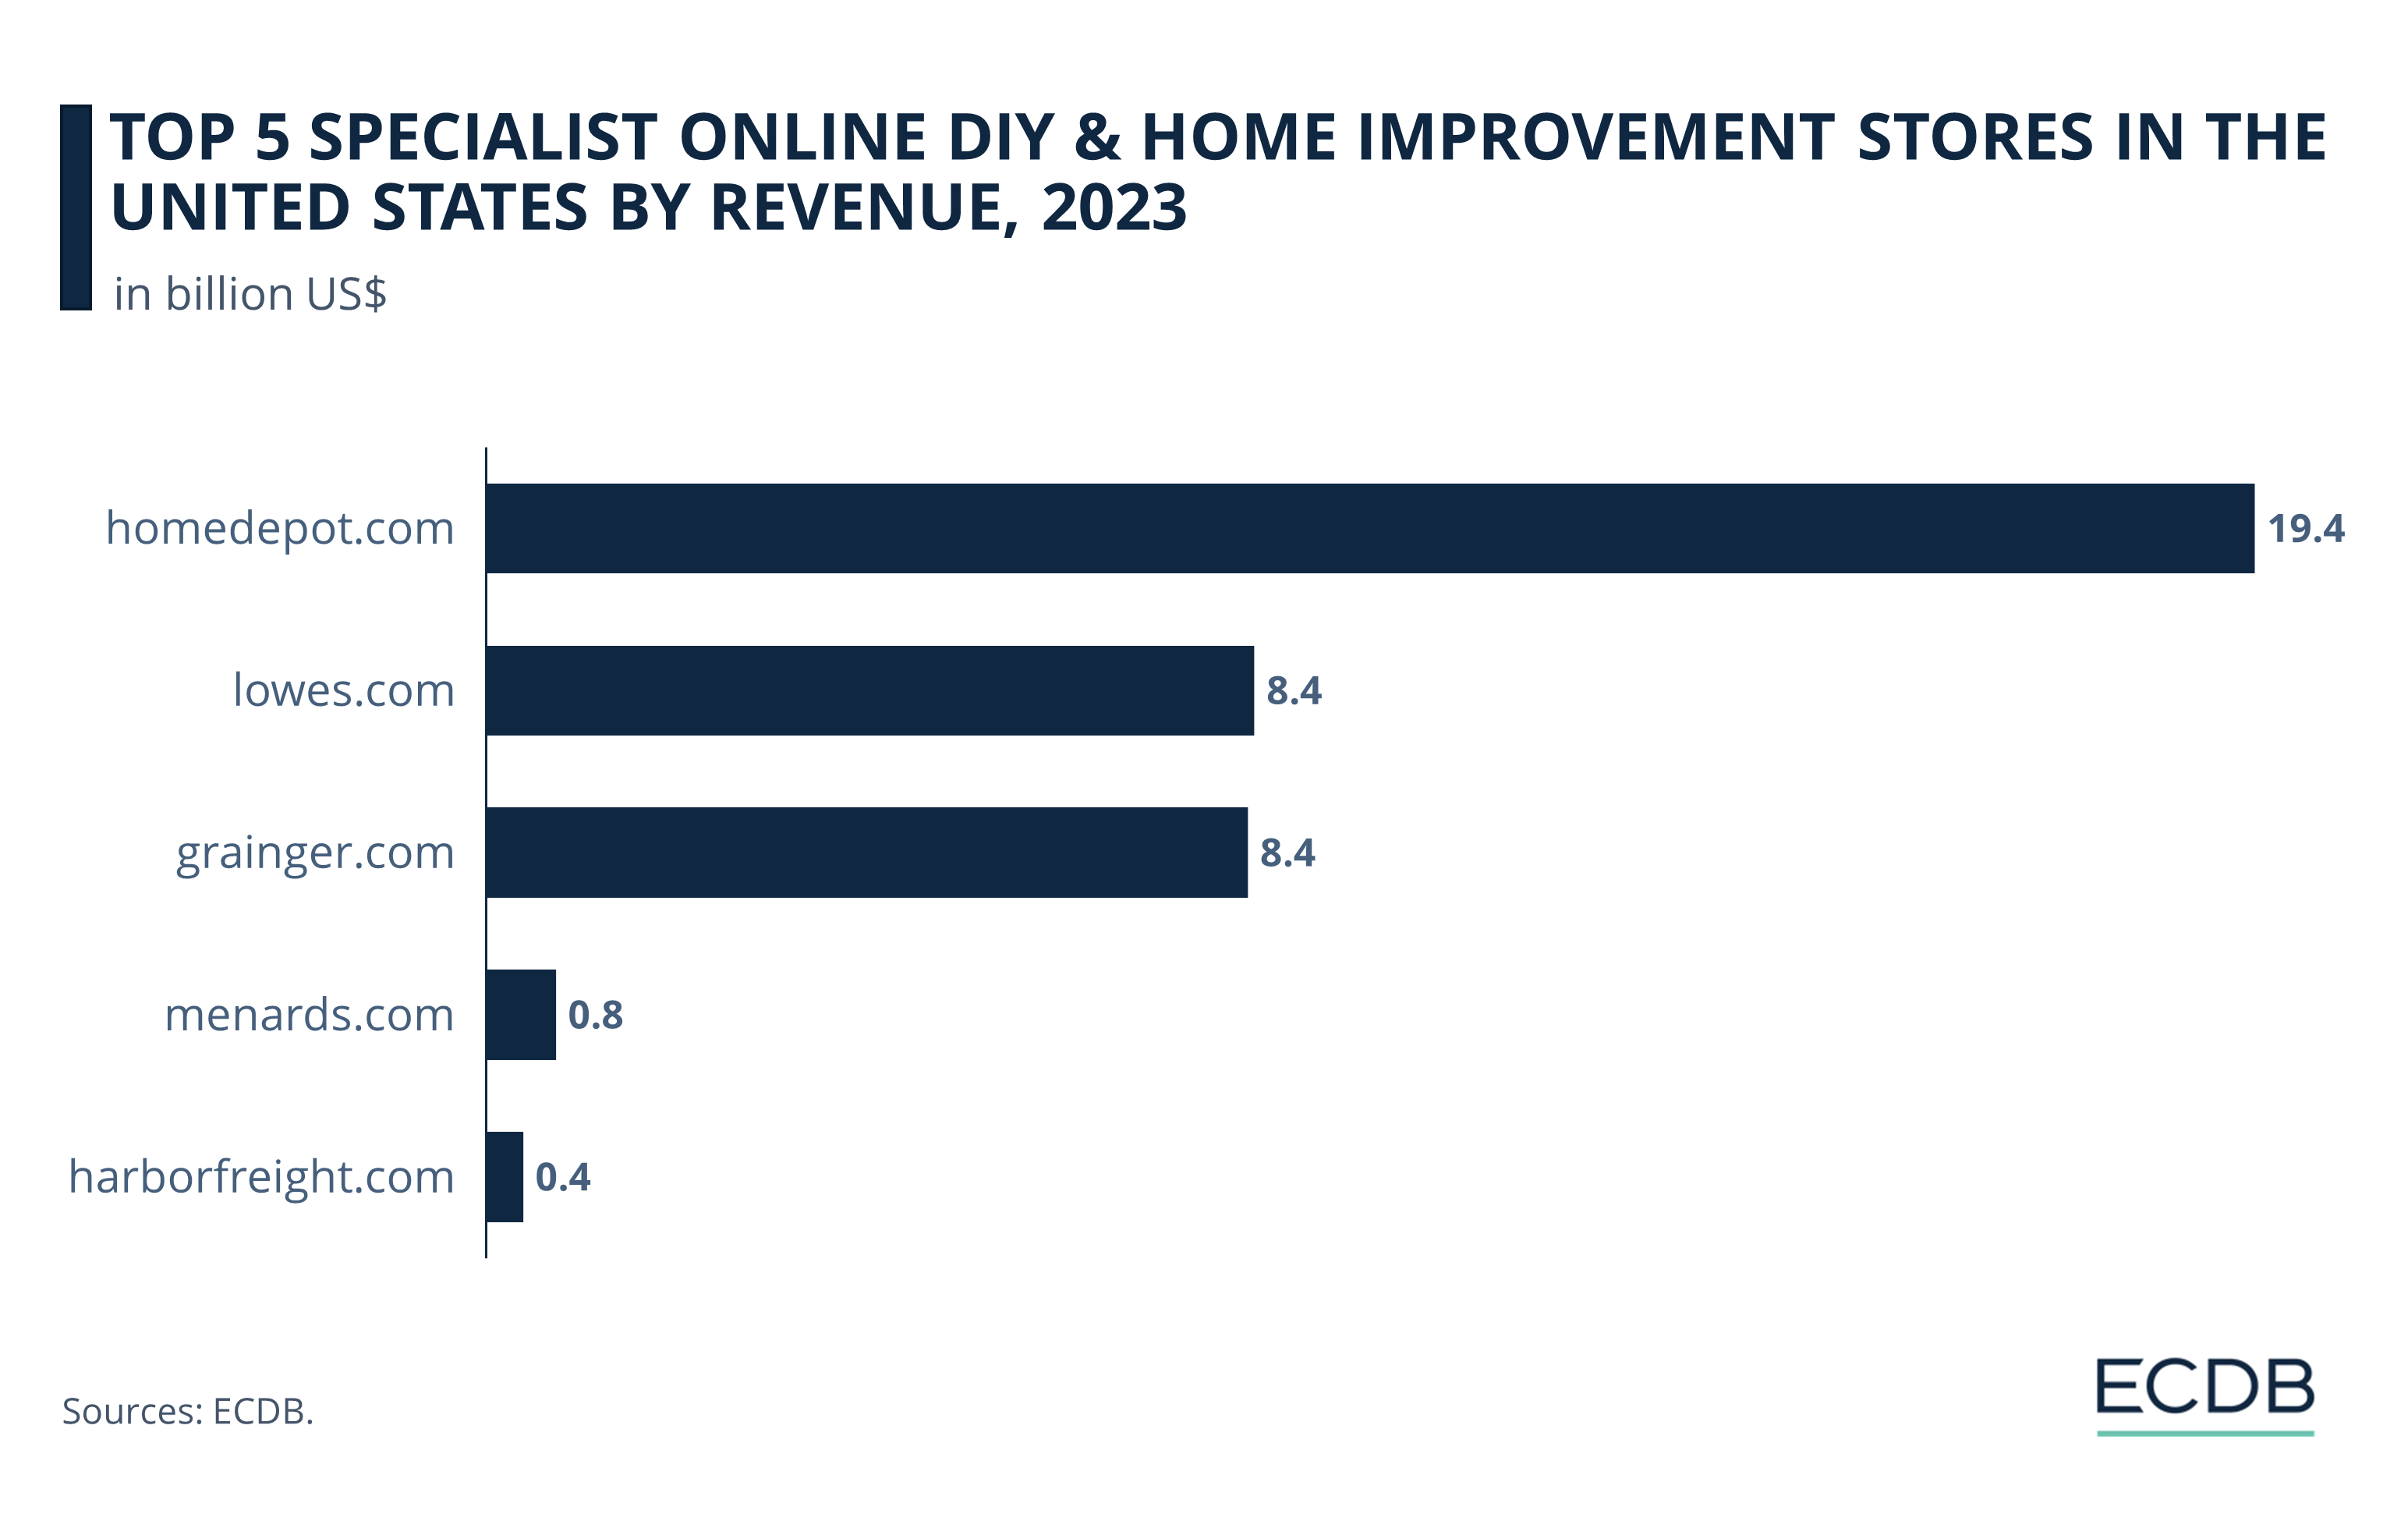 Top 5 Specialist Online DIY & Home Improvement Stores in the United States by Revenue, 2023